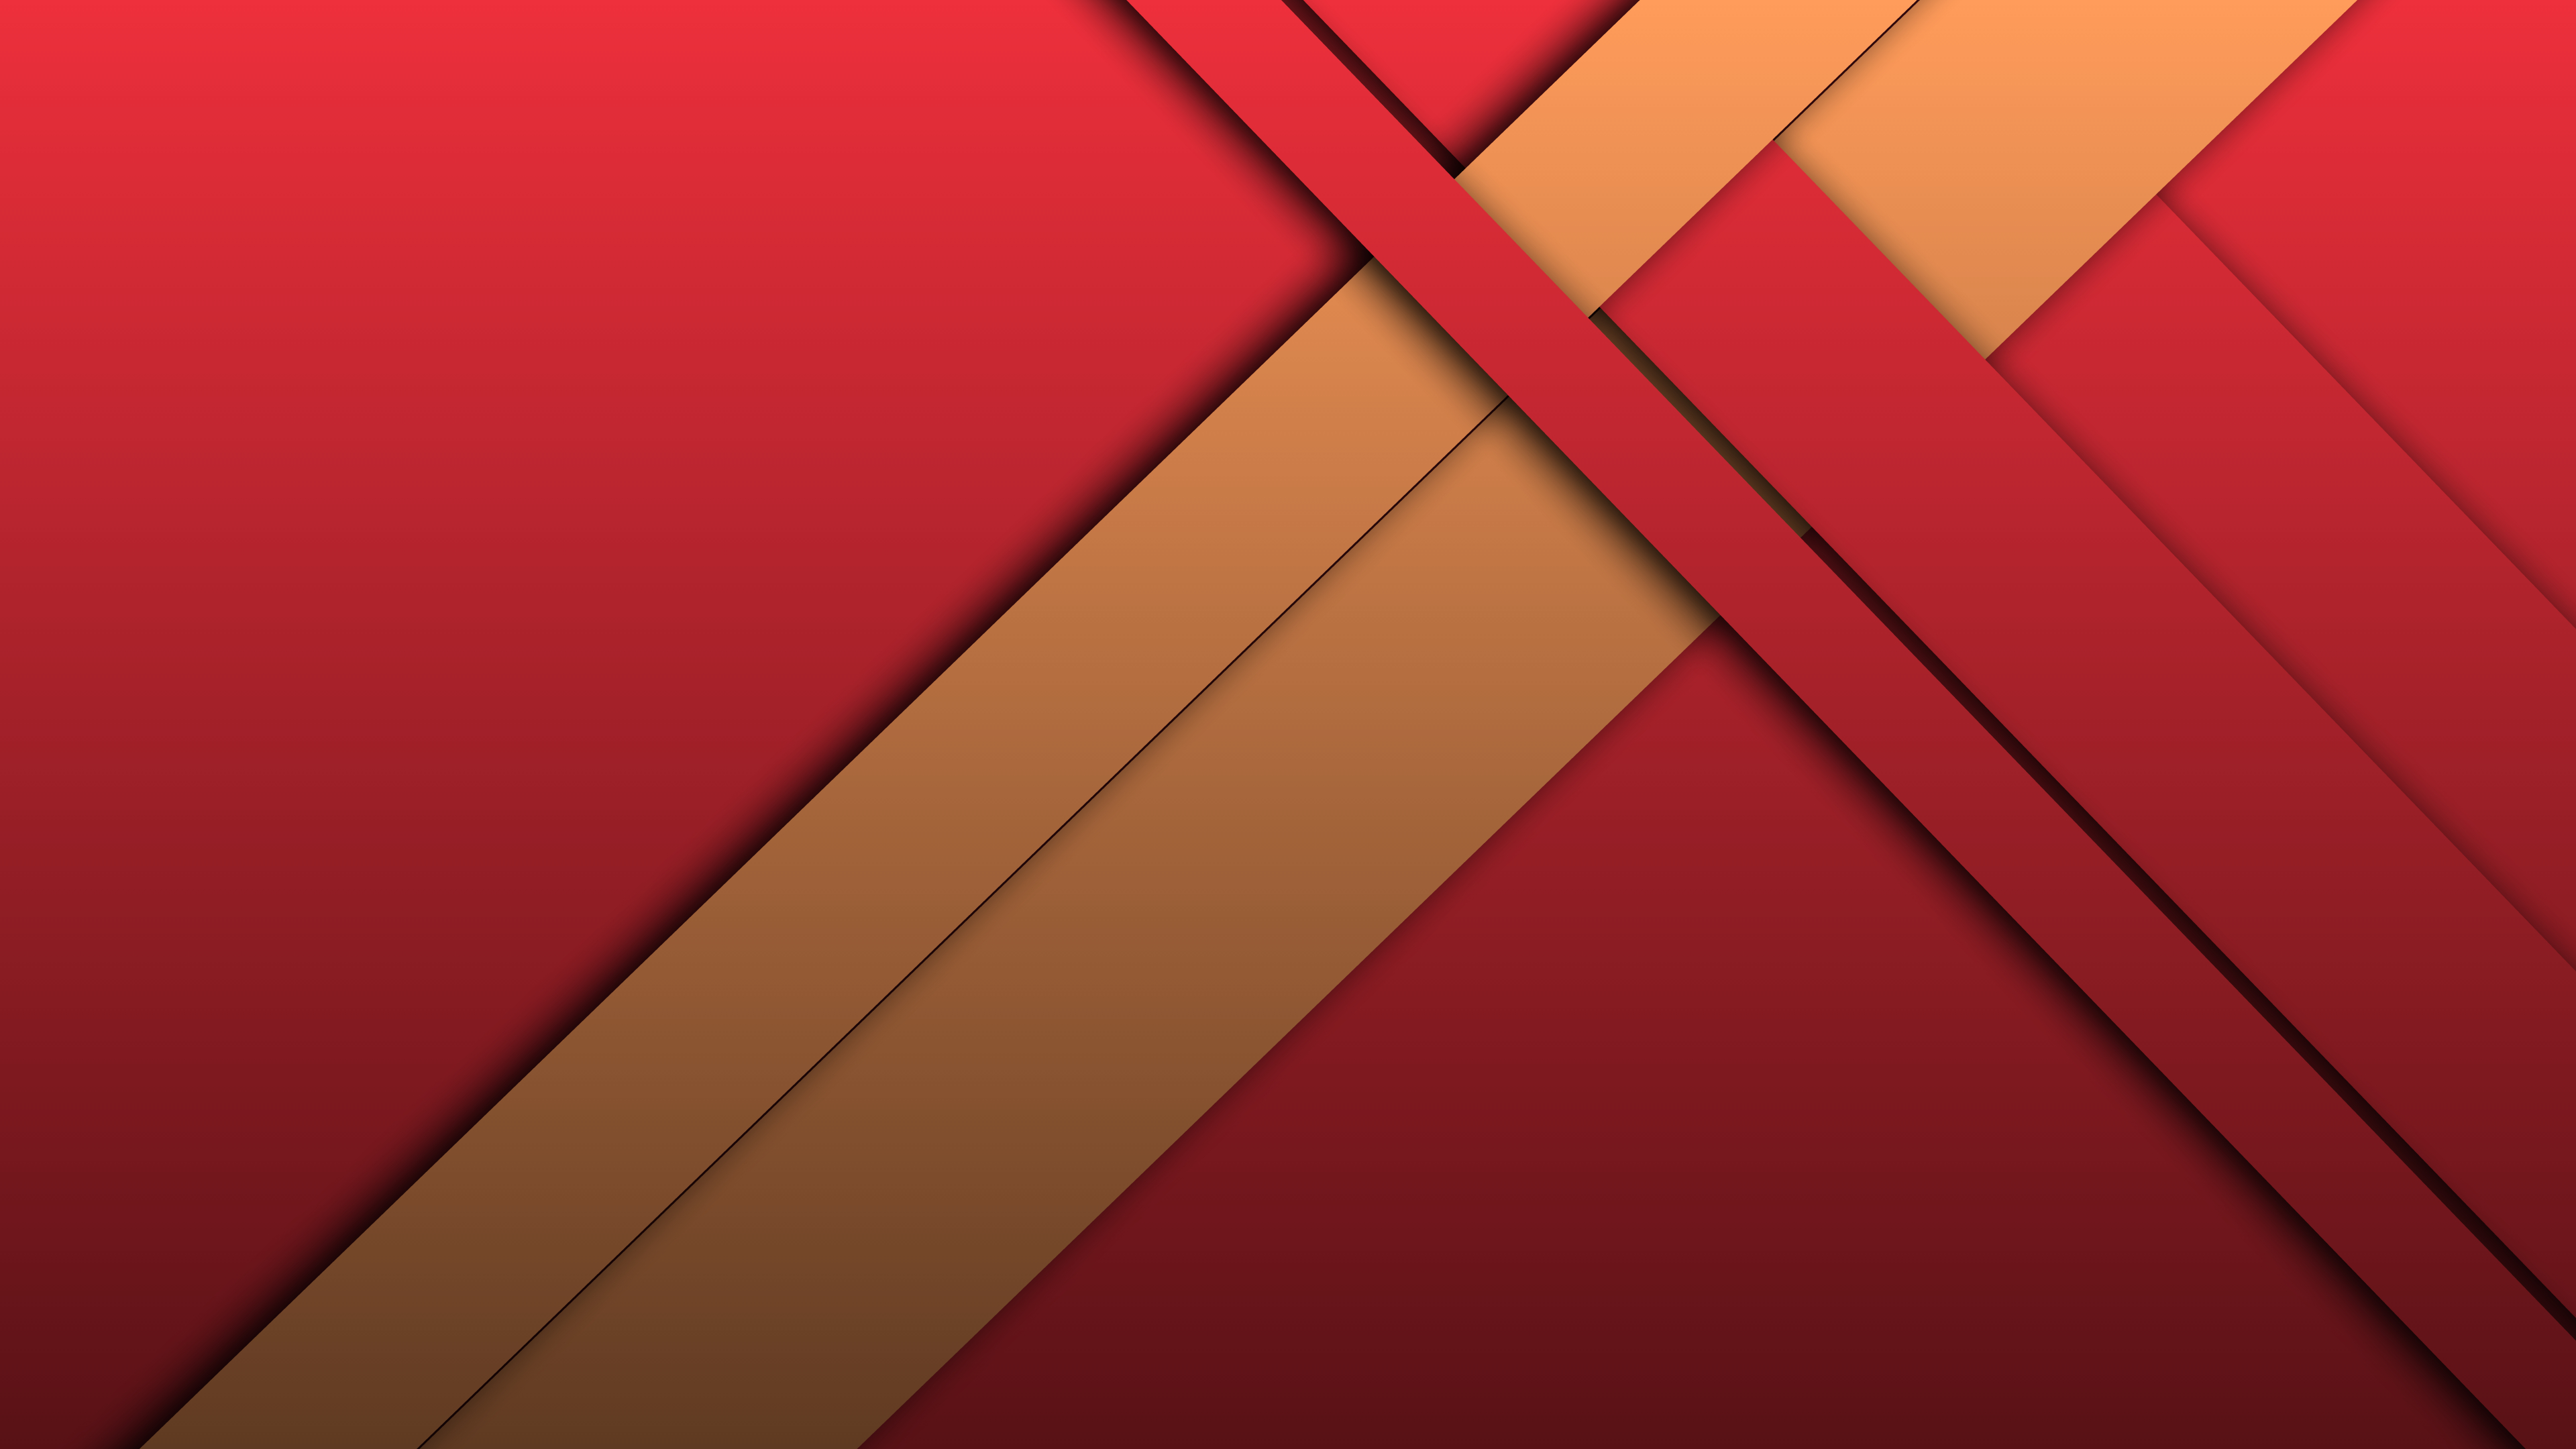 3840x2160 Red and Gold Abstract Wallpapers Top Free Red and Gold Abstract Backgrounds